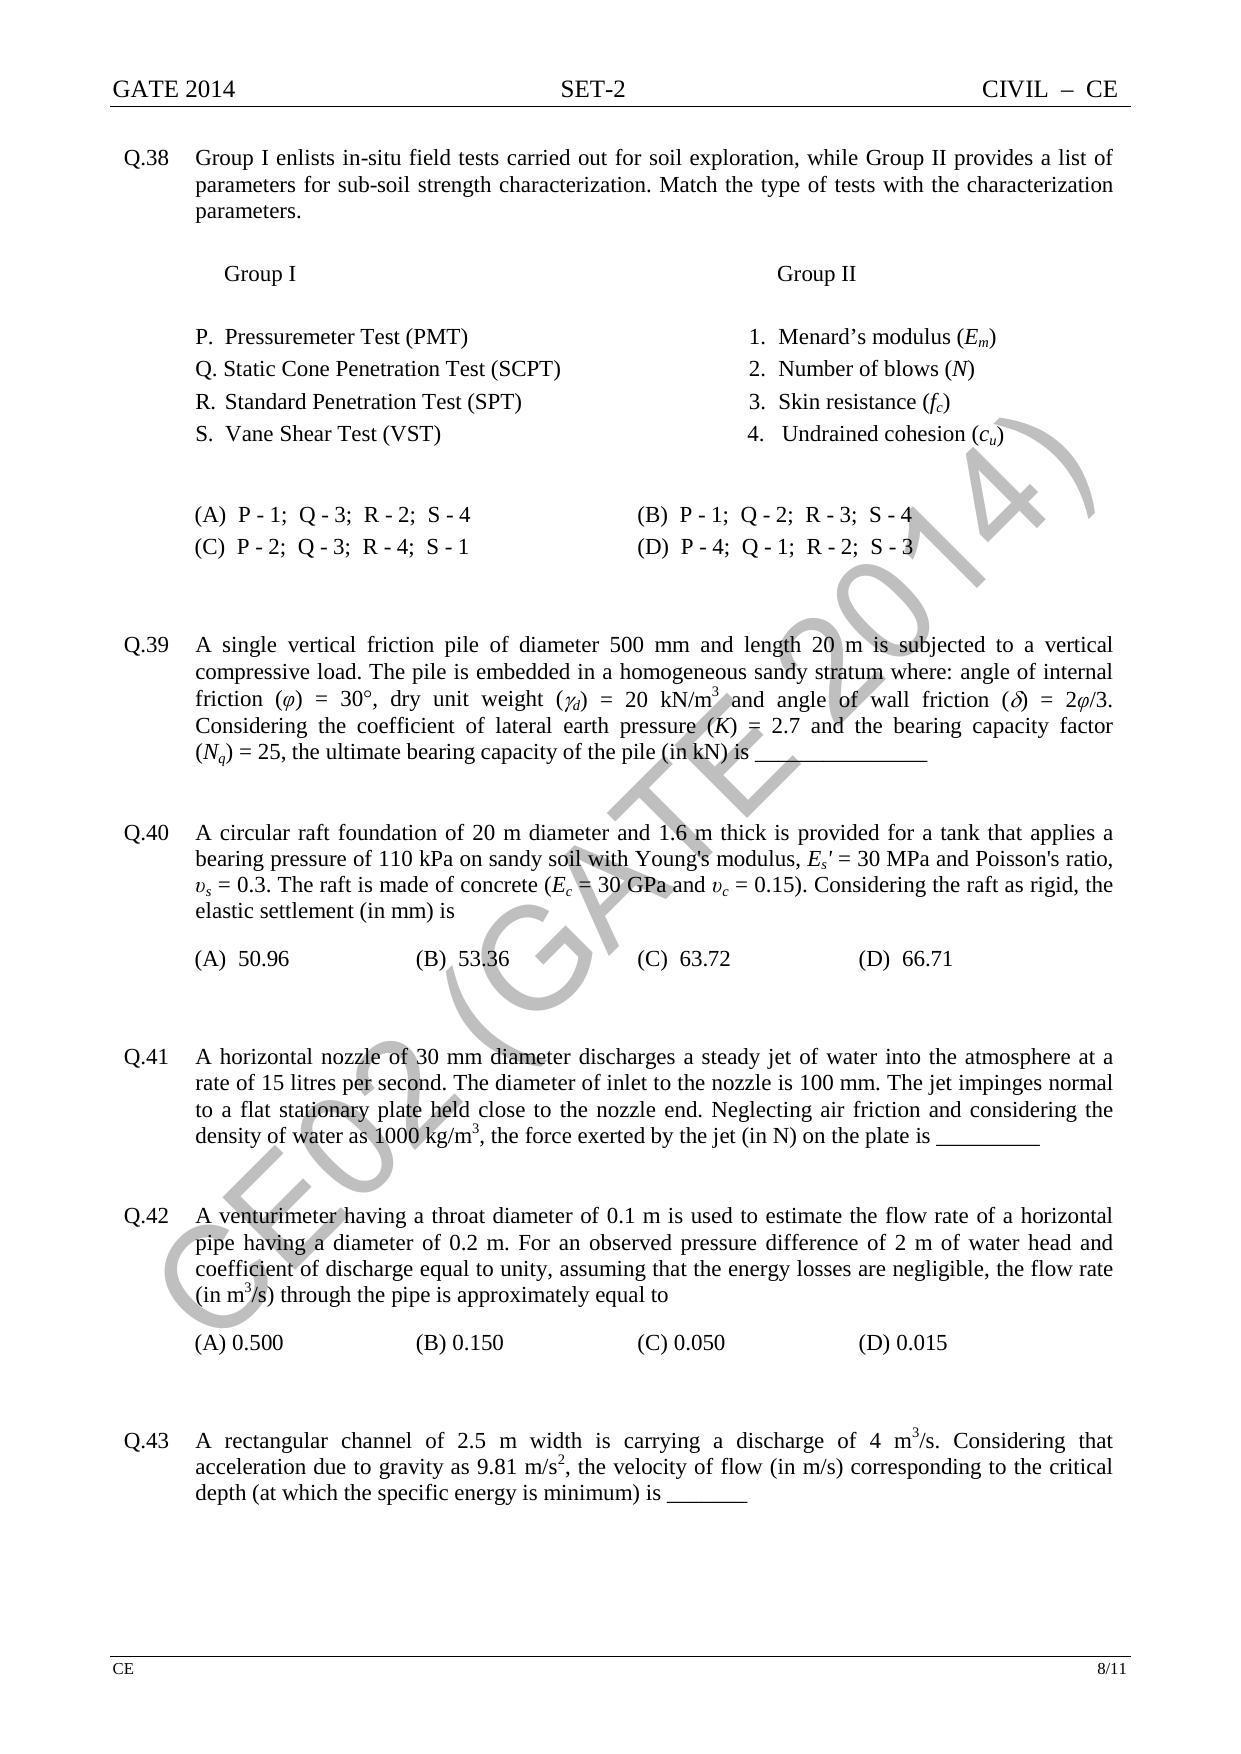 GATE 2014 Civil Engineering (CE) Question Paper with Answer Key - Page 36